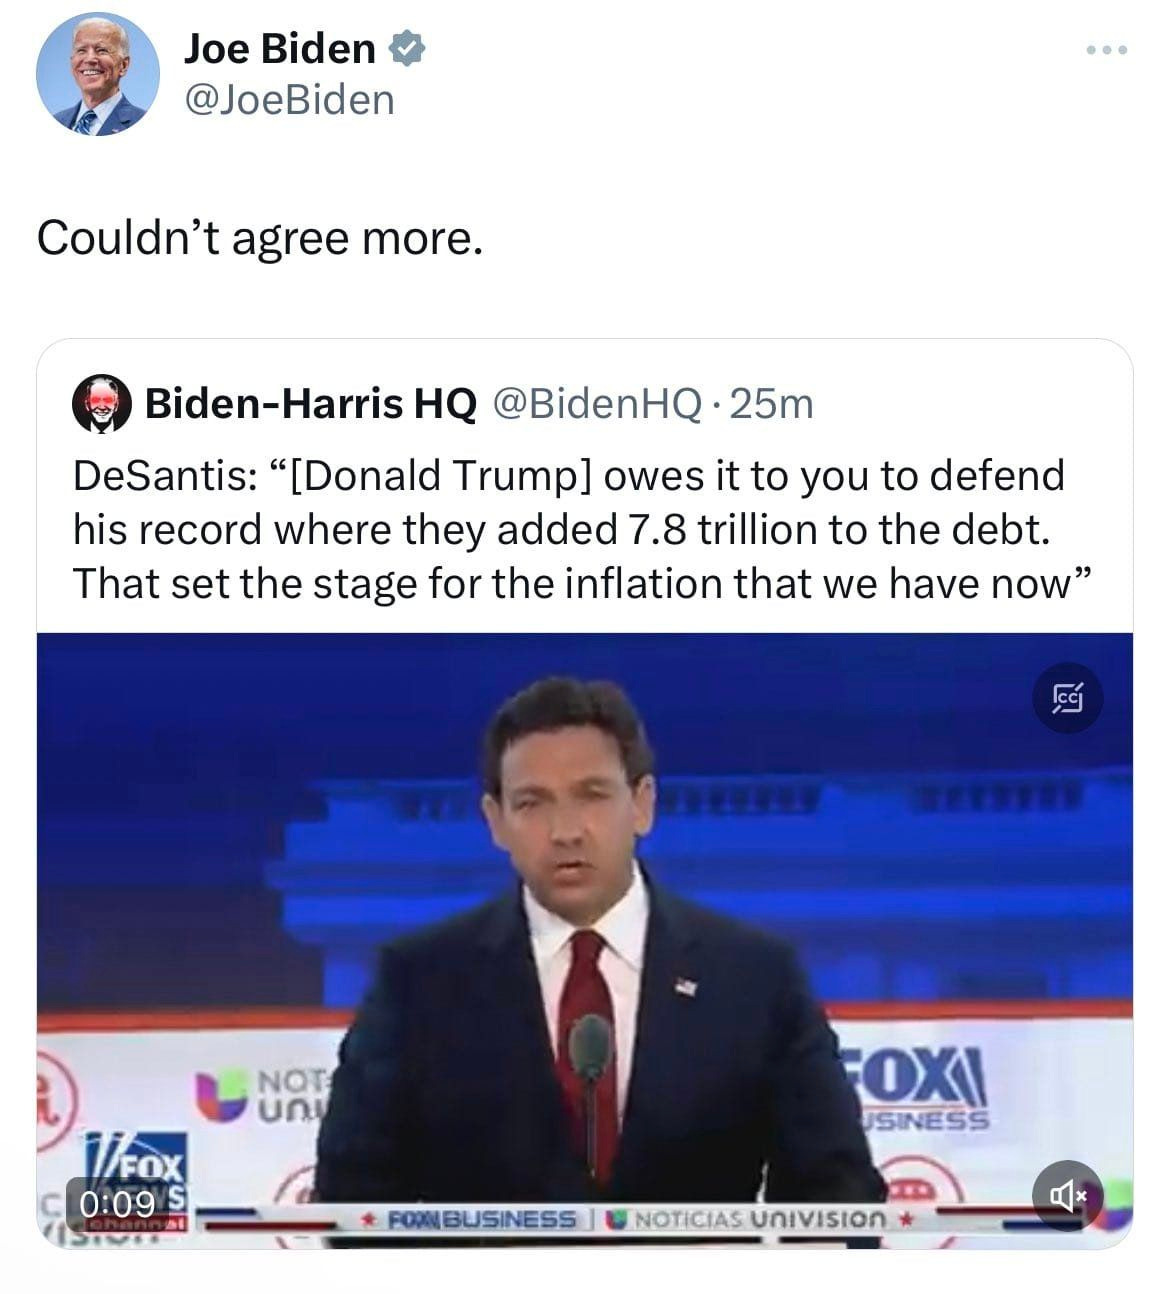 May be an image of 2 people, the Oval Office and text that says 'Joe Biden @JoeBiden Couldn' agree more. Biden-Harris HQ @BidenHQ 25m DeSantis: "[Donald Trump] owes it to you to defend his record where they added 7.8 trillion to the debt. That set the stage for the inflation that we have now" NOT un VFOX 0:09 FOXI USINESS FORNBUSINESS NOTICIAS UniVisIOn'